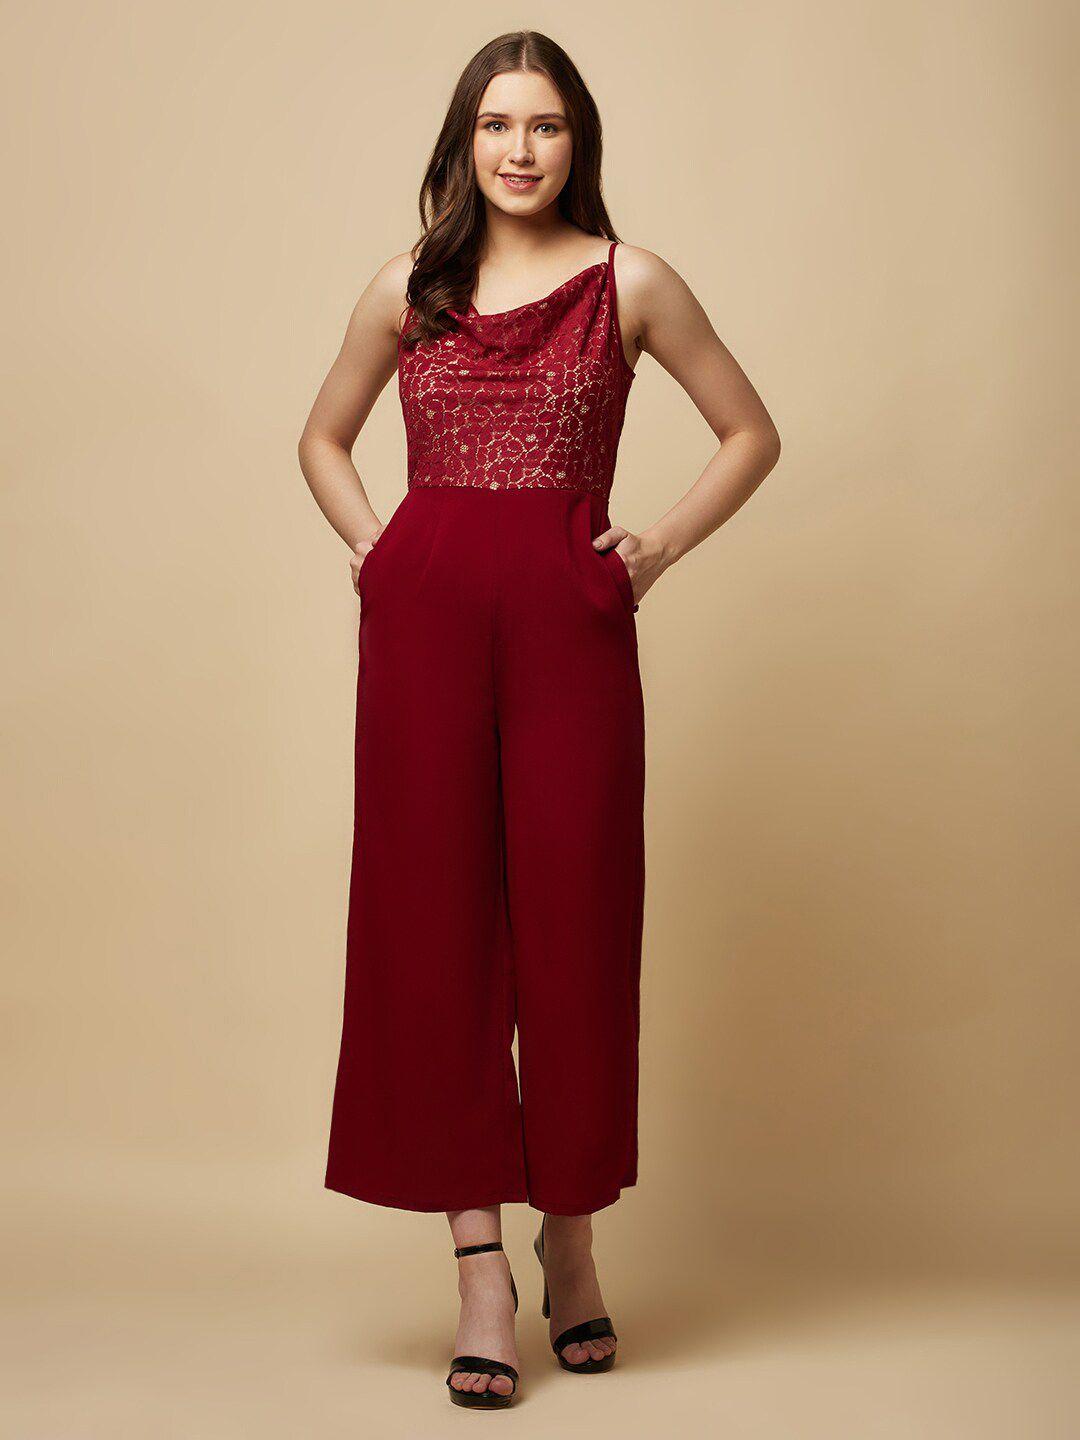 raassio-cowl-neck-basic-jumpsuit-with-lace-inserts